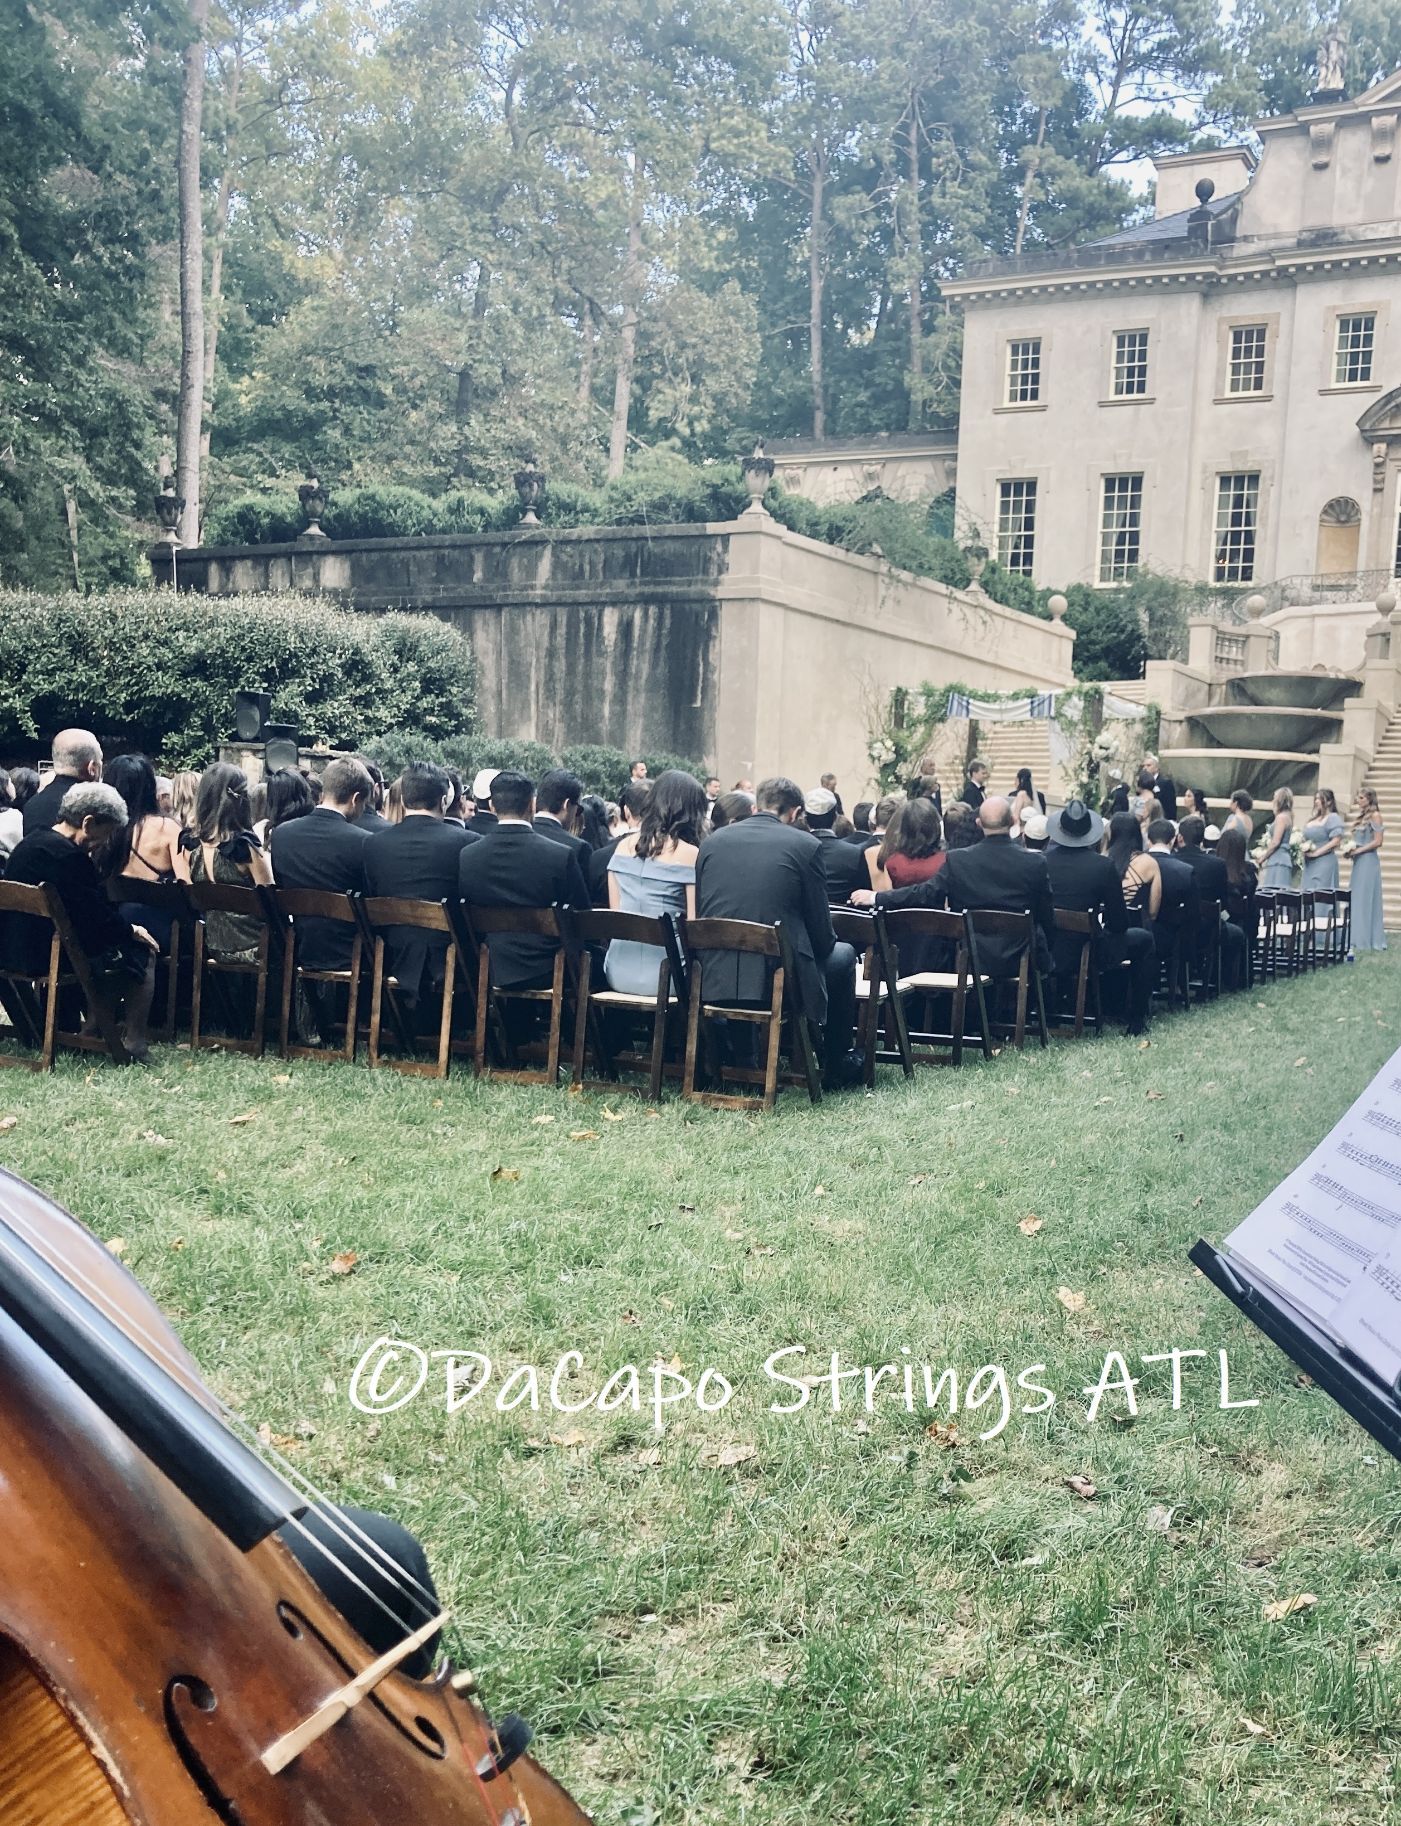 DaCapo Strings helped make the ceremony so perfect and personal